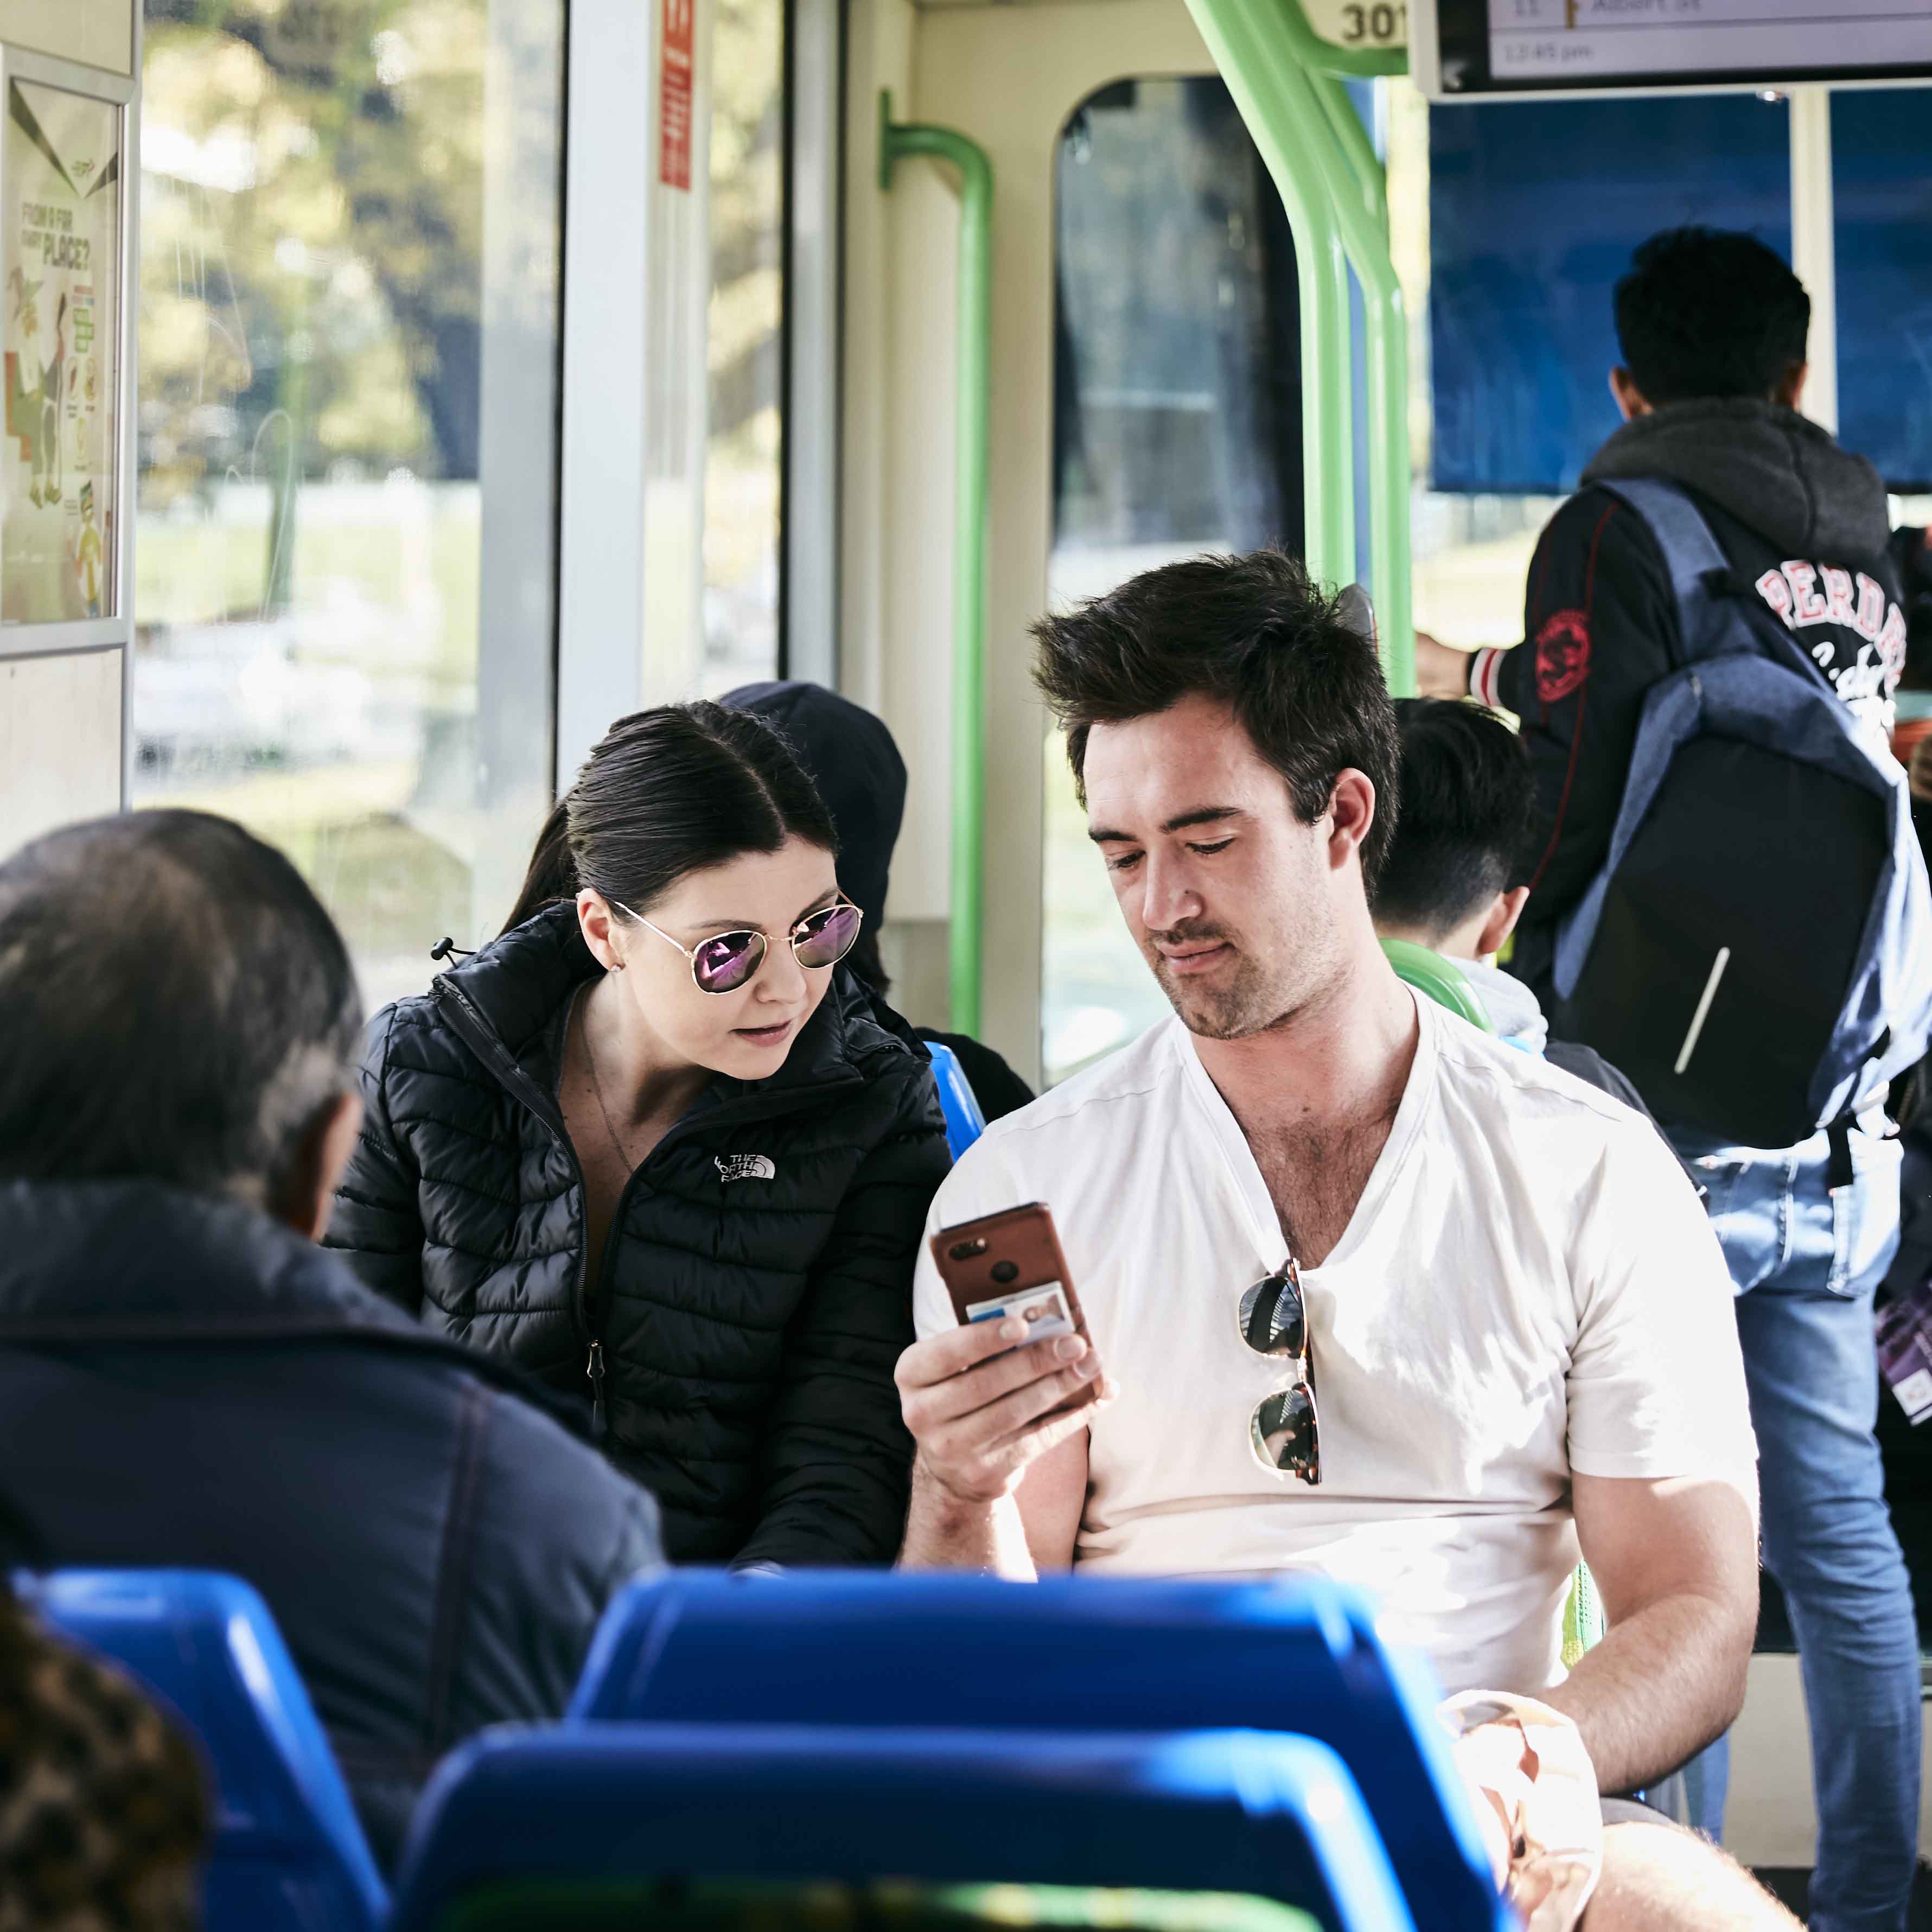 Image shows two people looking at a mobile phone while travelling on a tram.